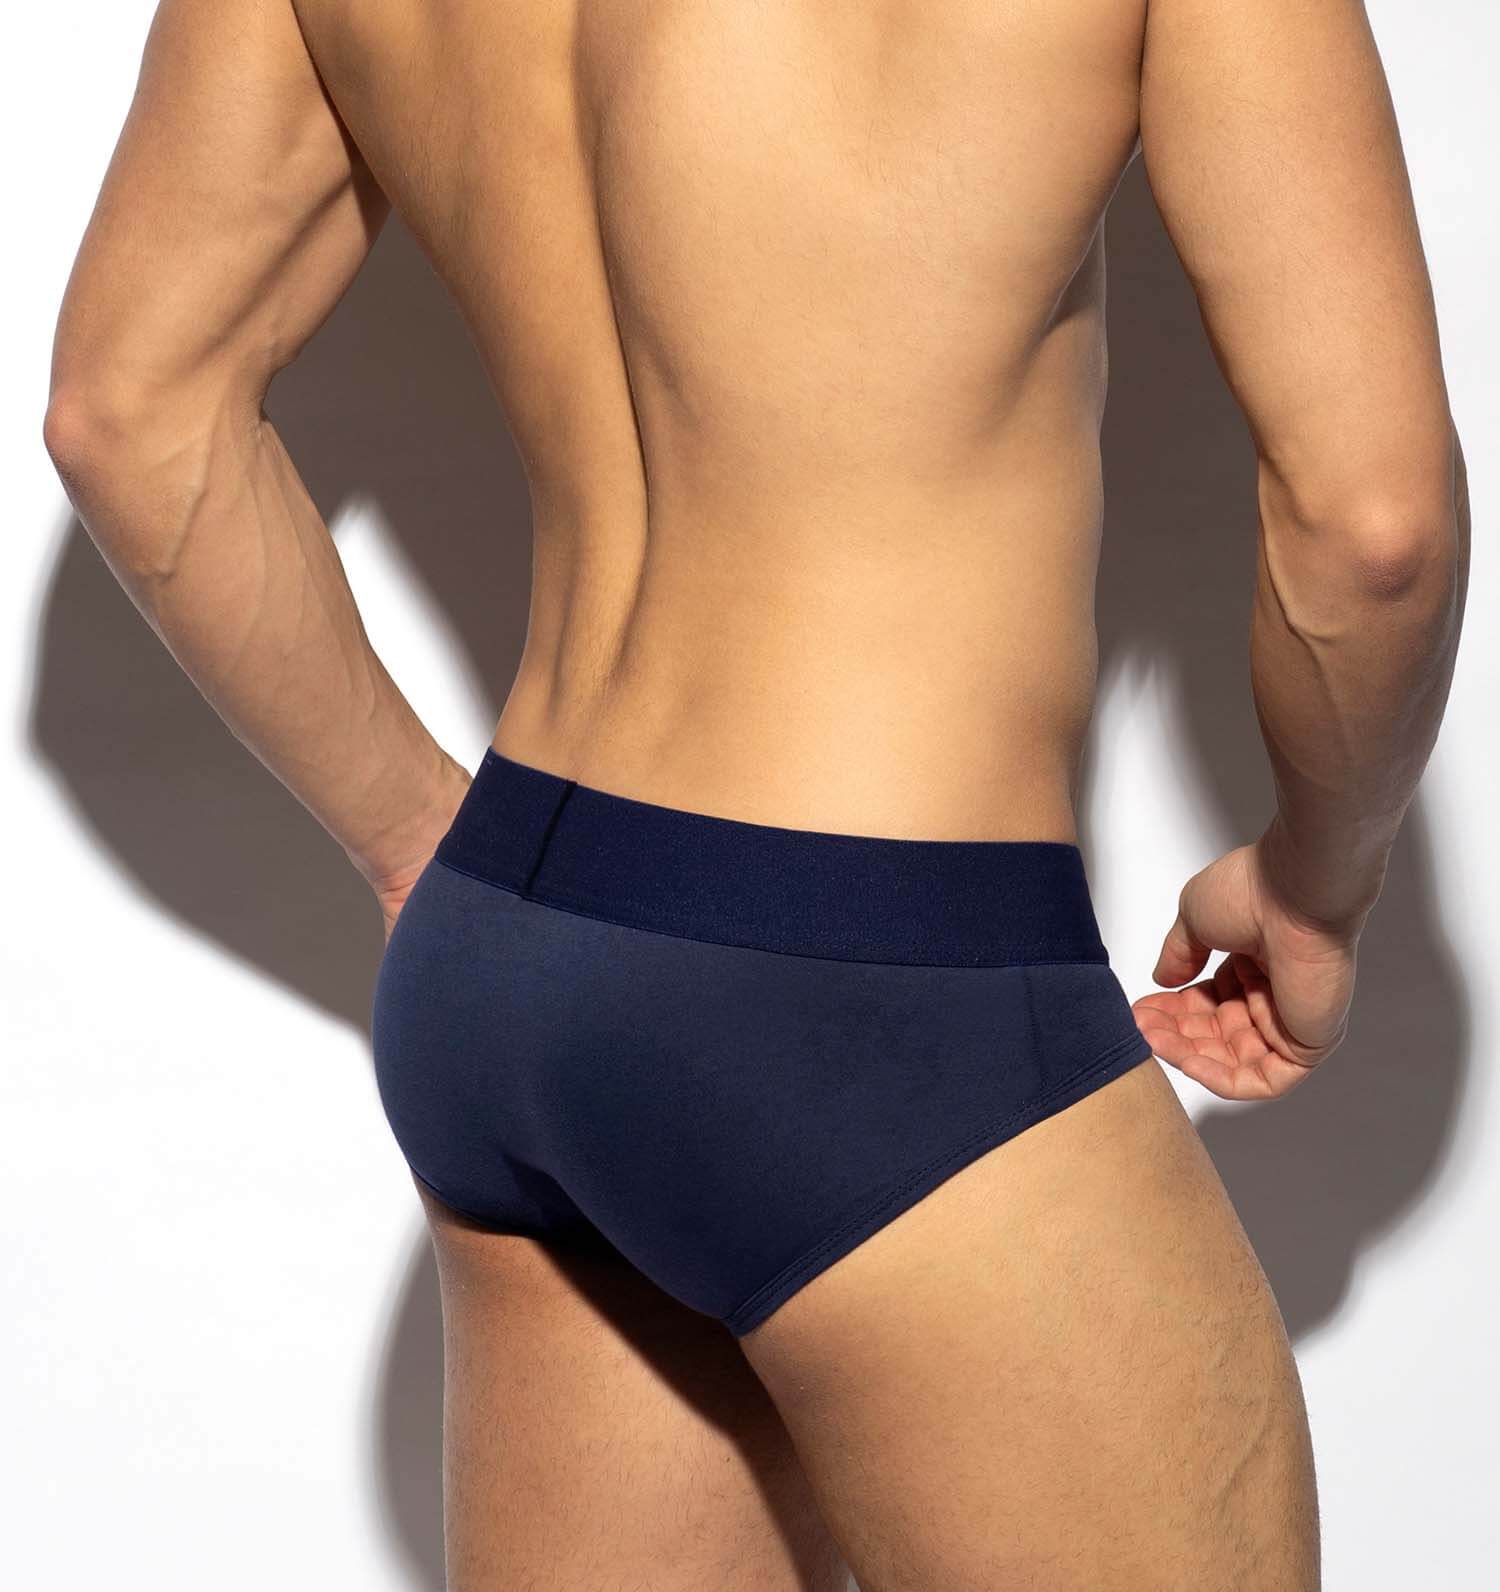 ES Collection Recycled Rib Thong - Navy